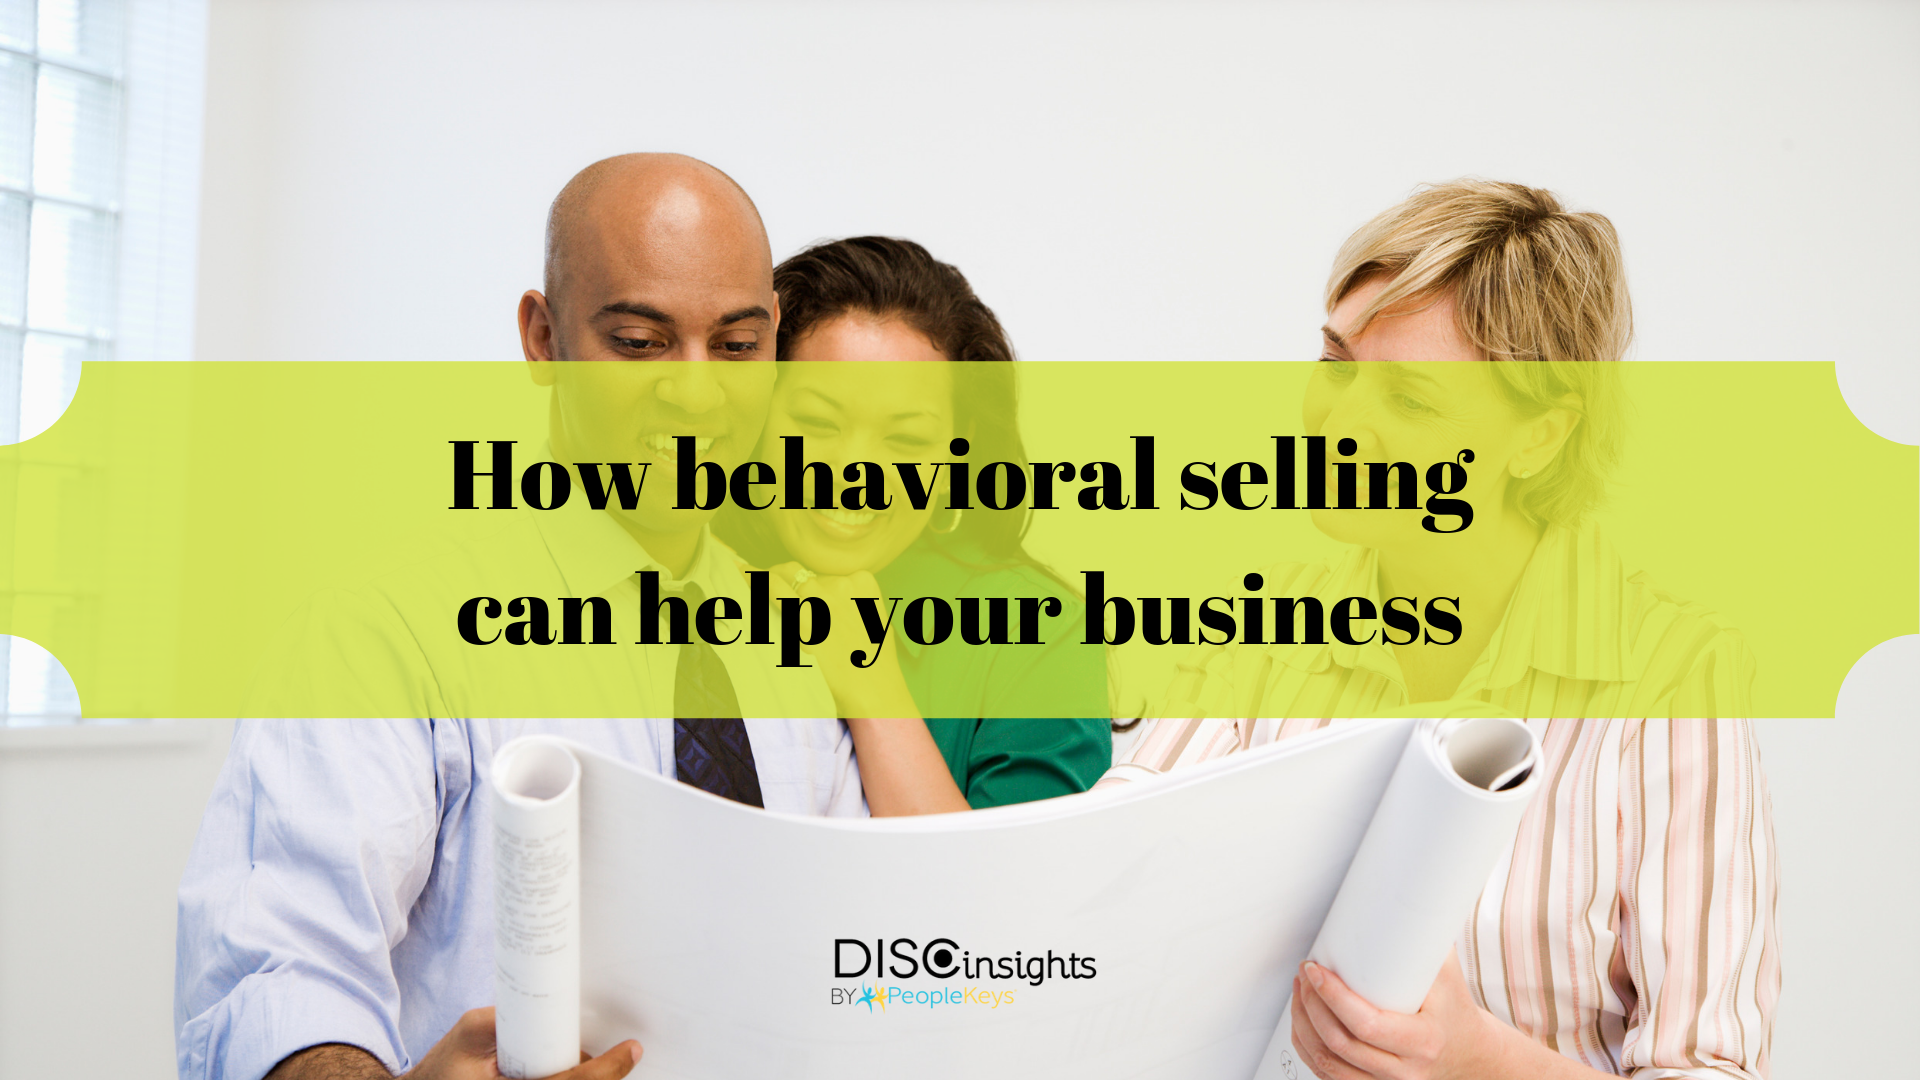 How behavioral selling can help your business